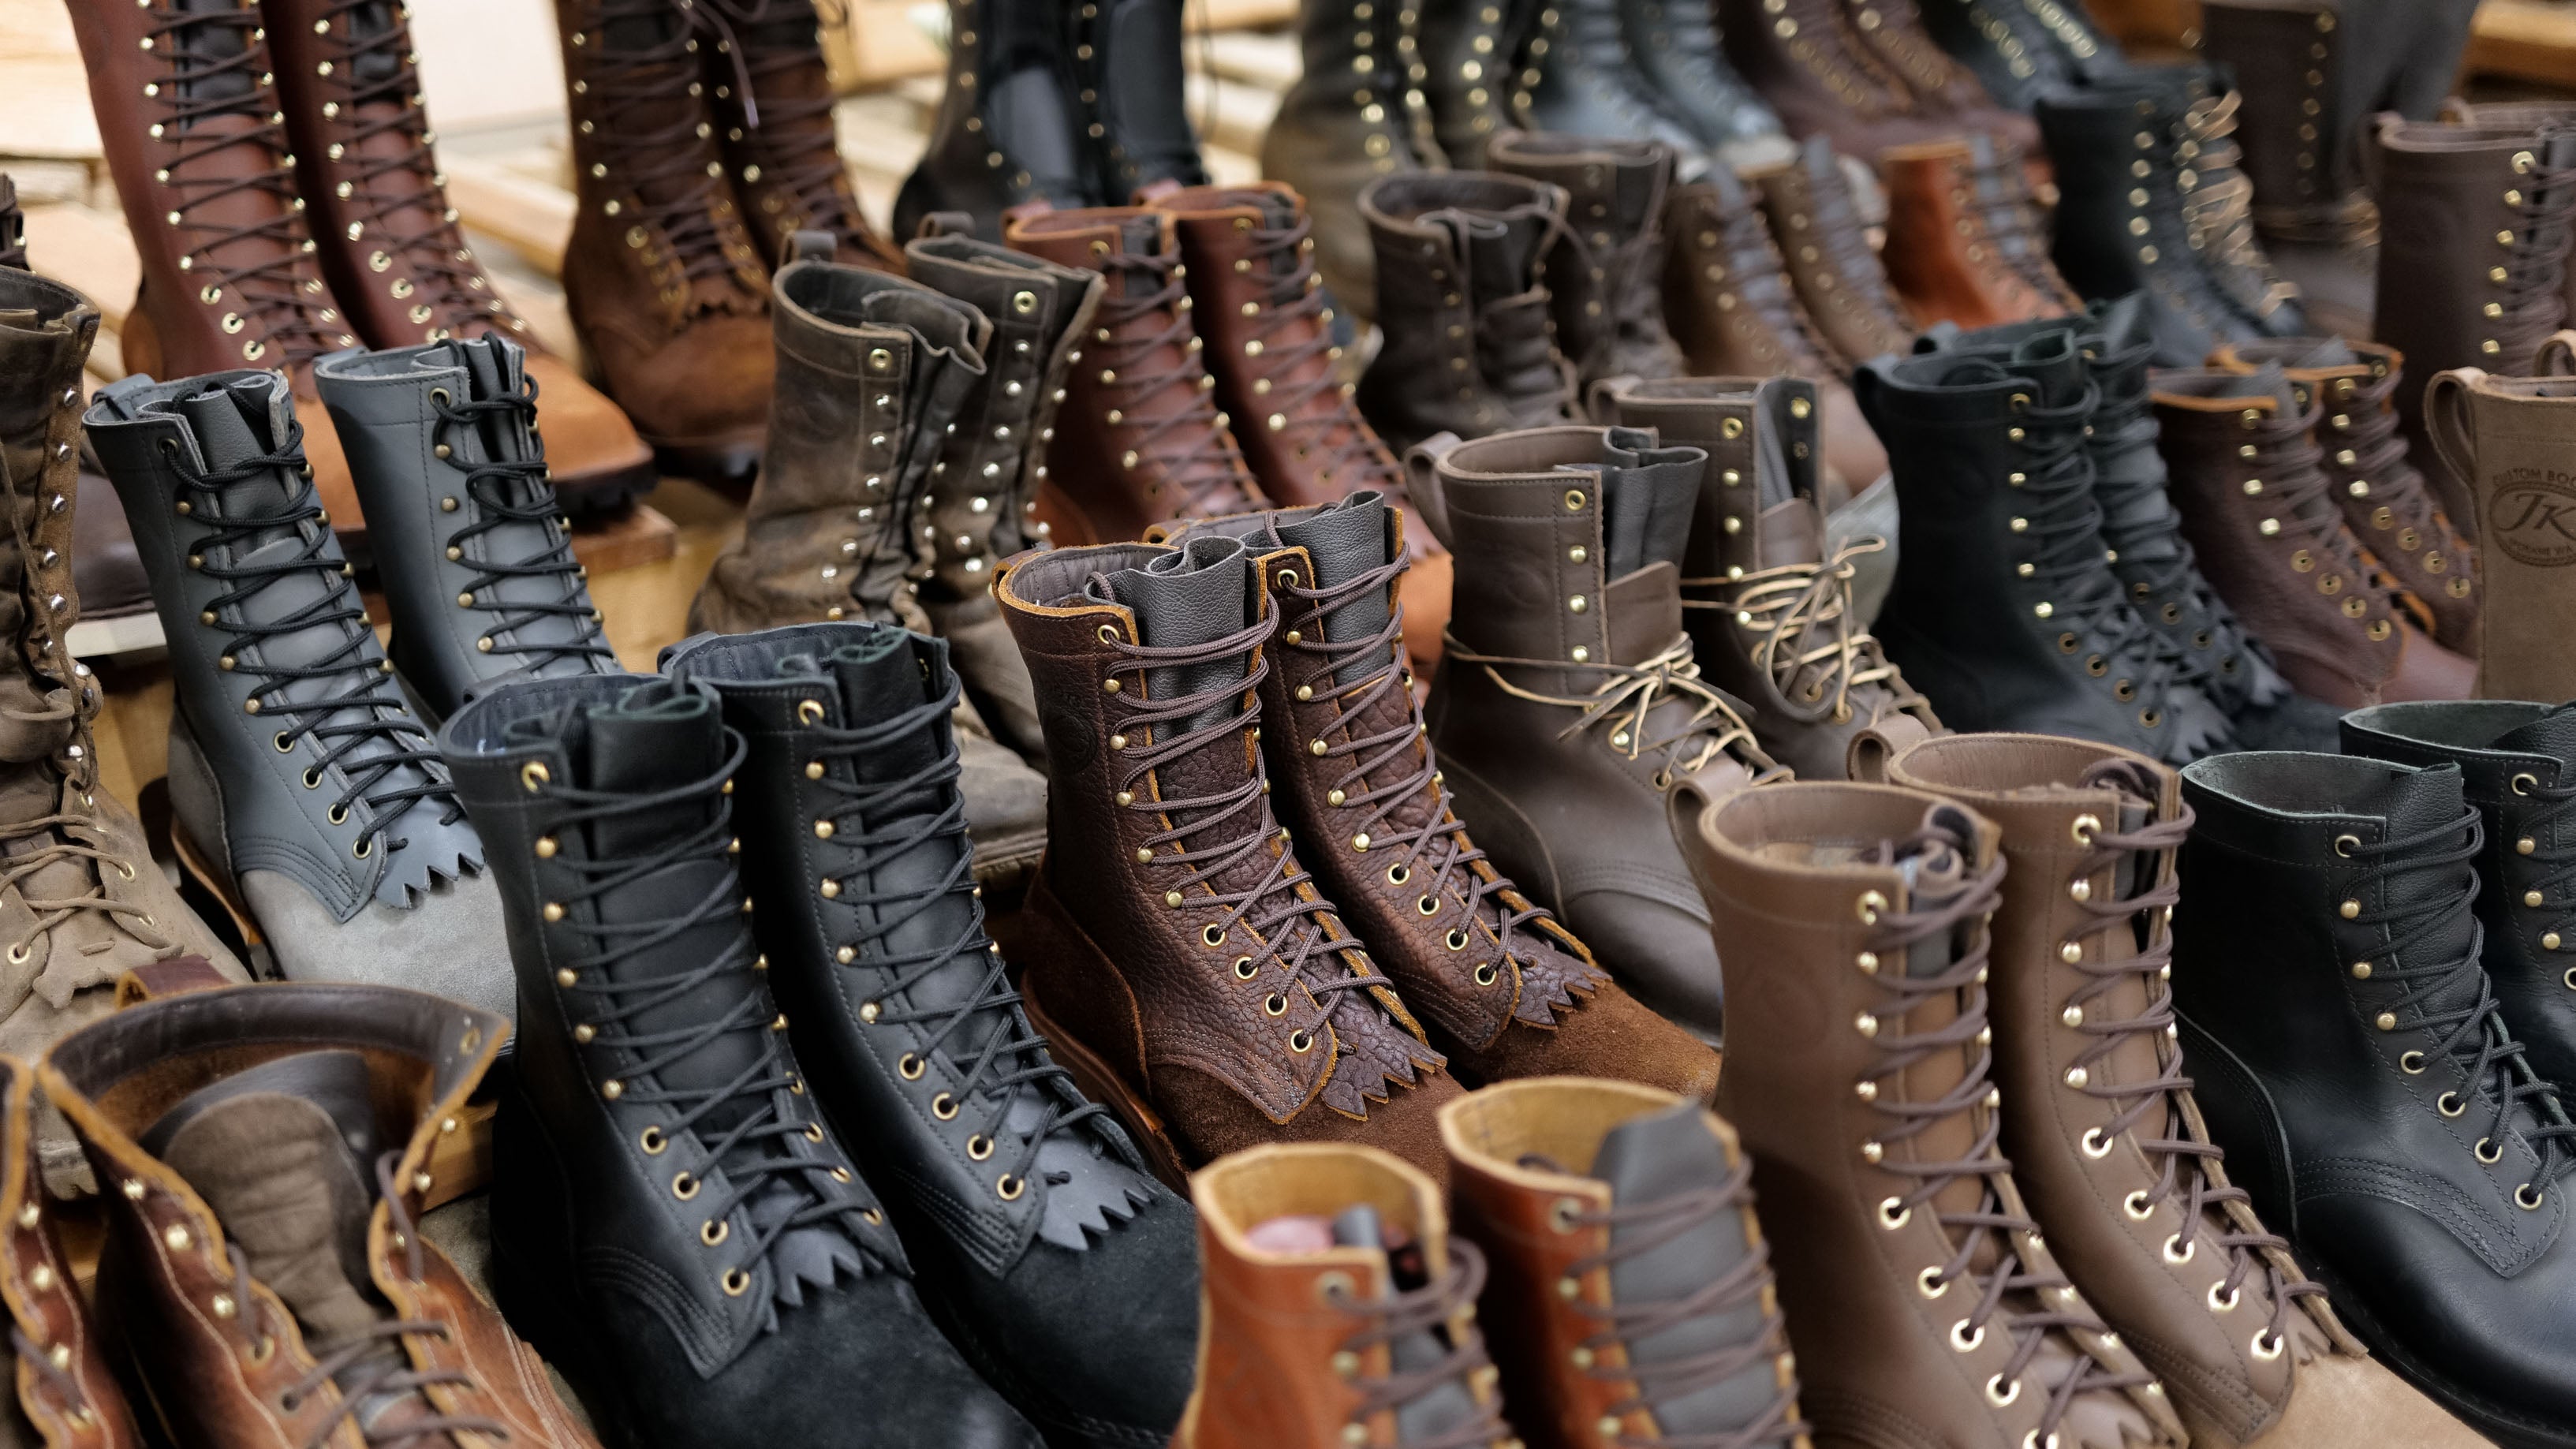 Boot Storage Tips: How to Store Boots So They Last Season After Season